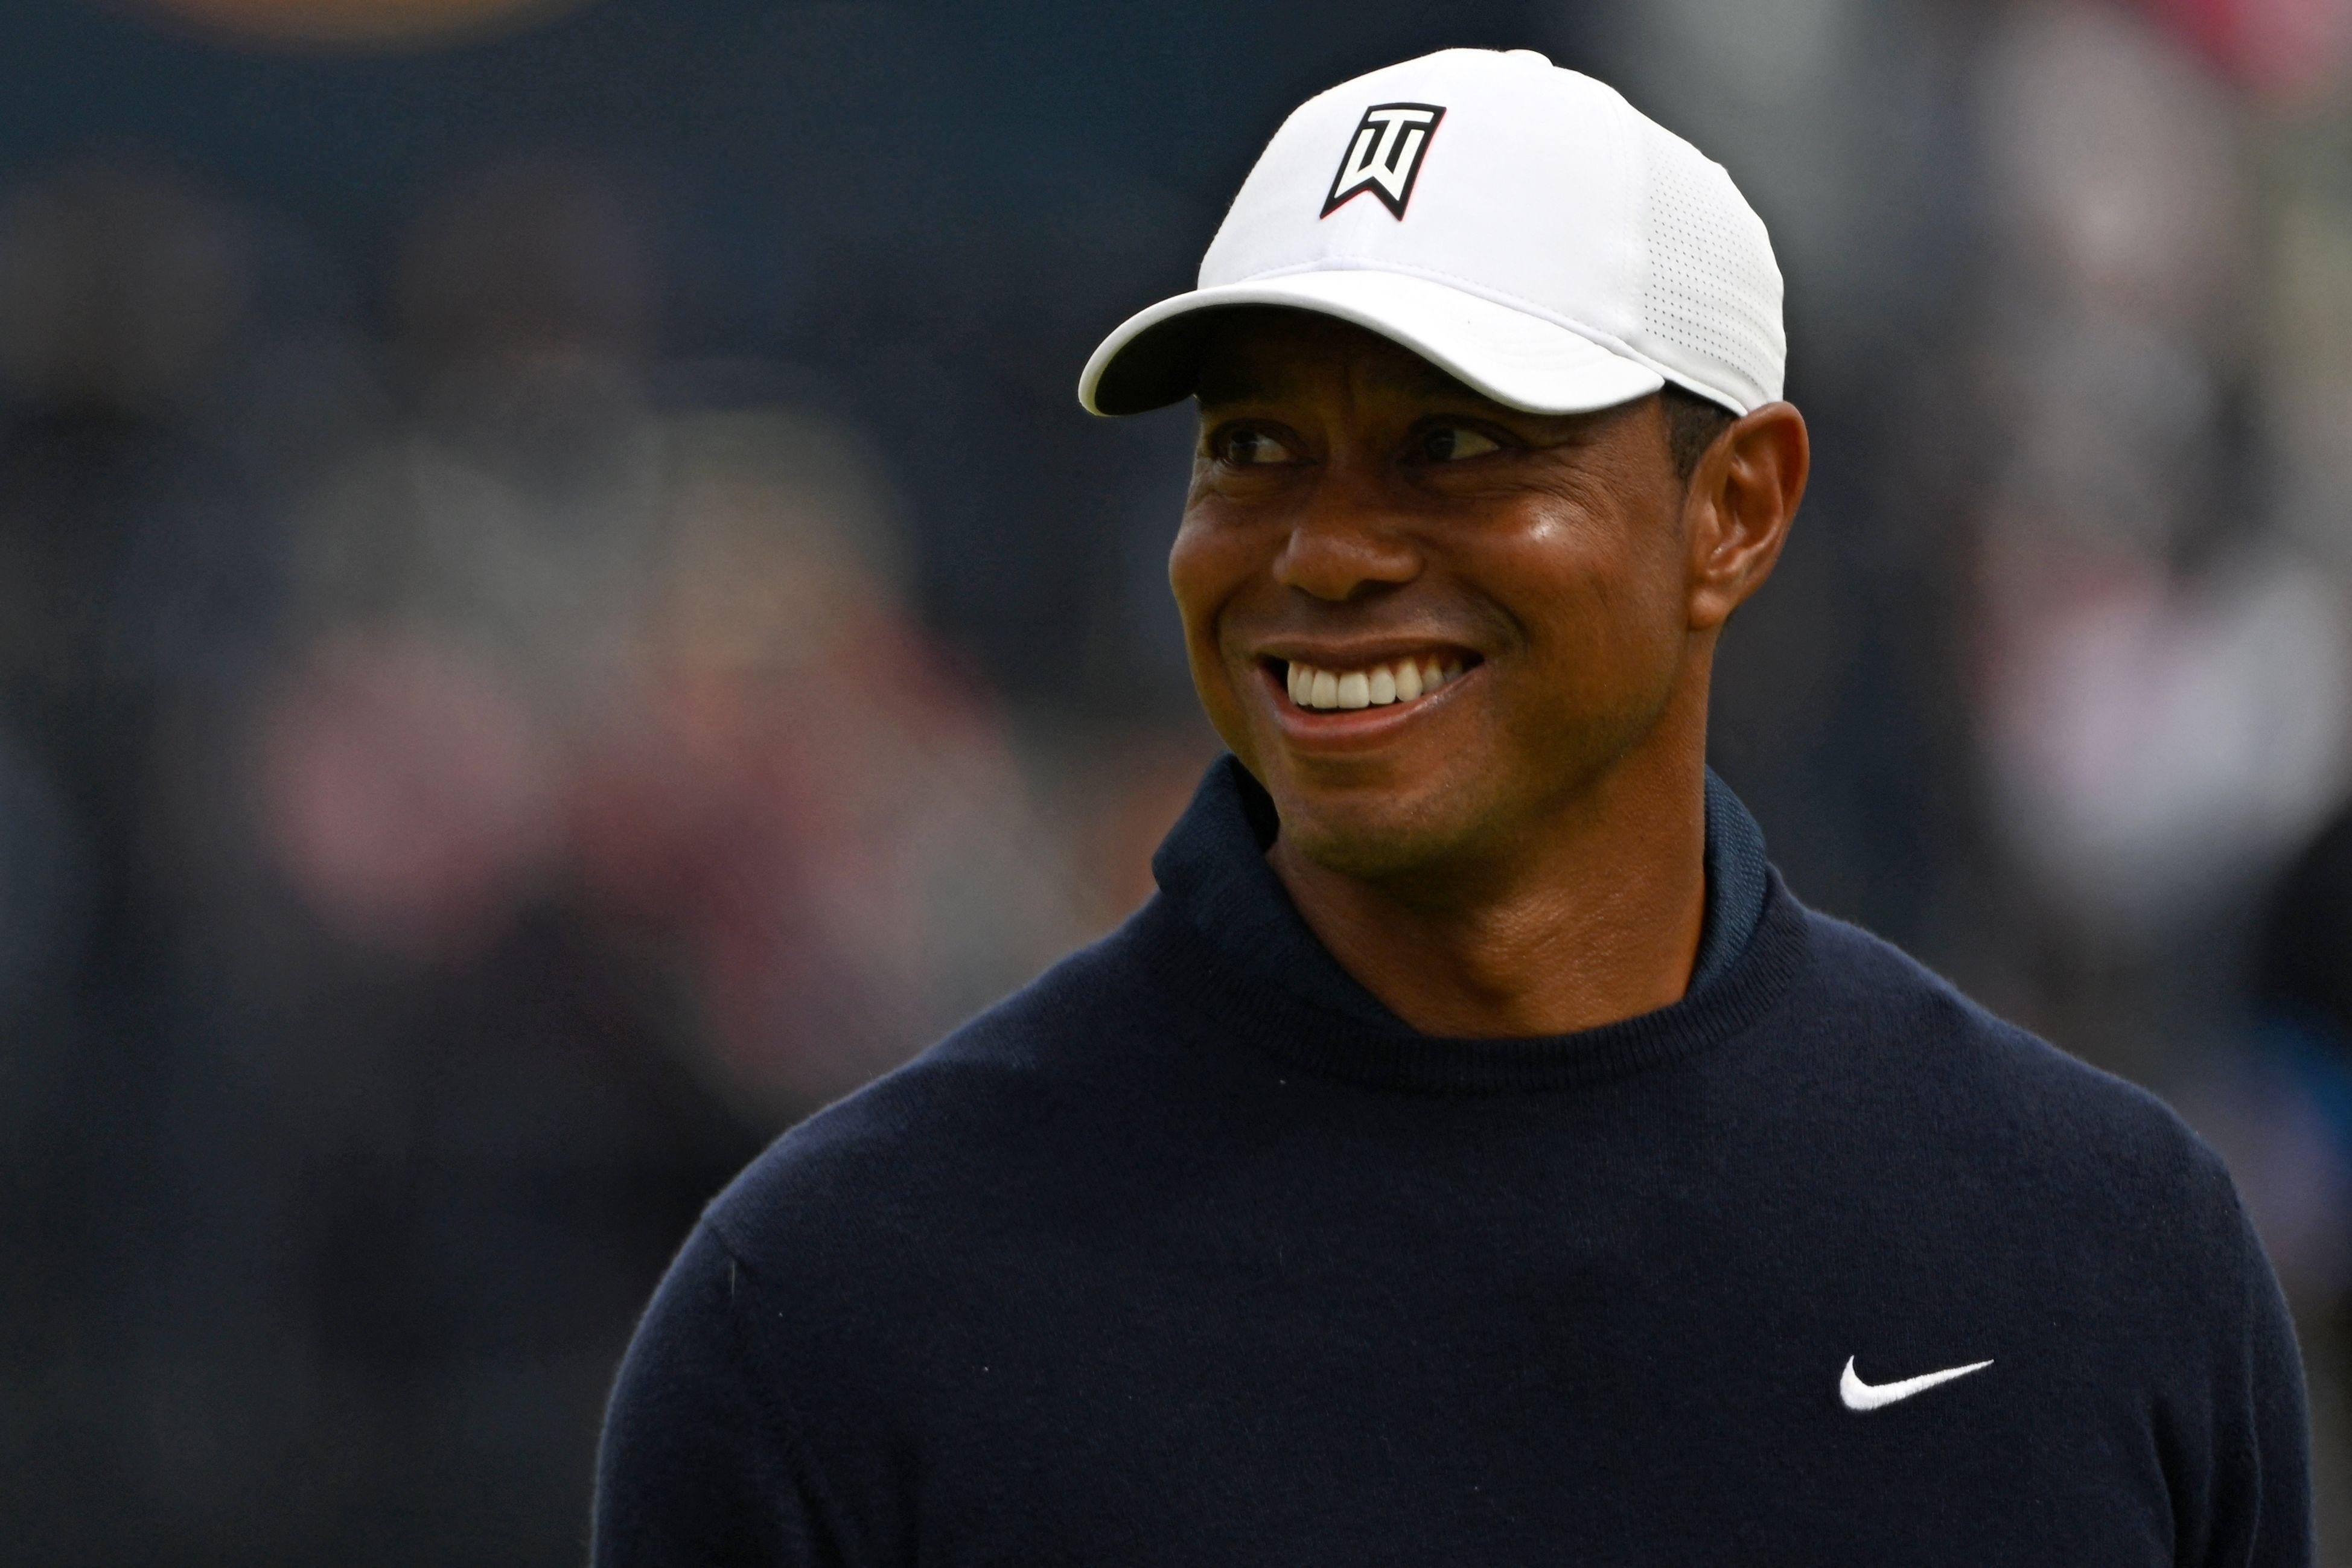 Woods smiling on the course